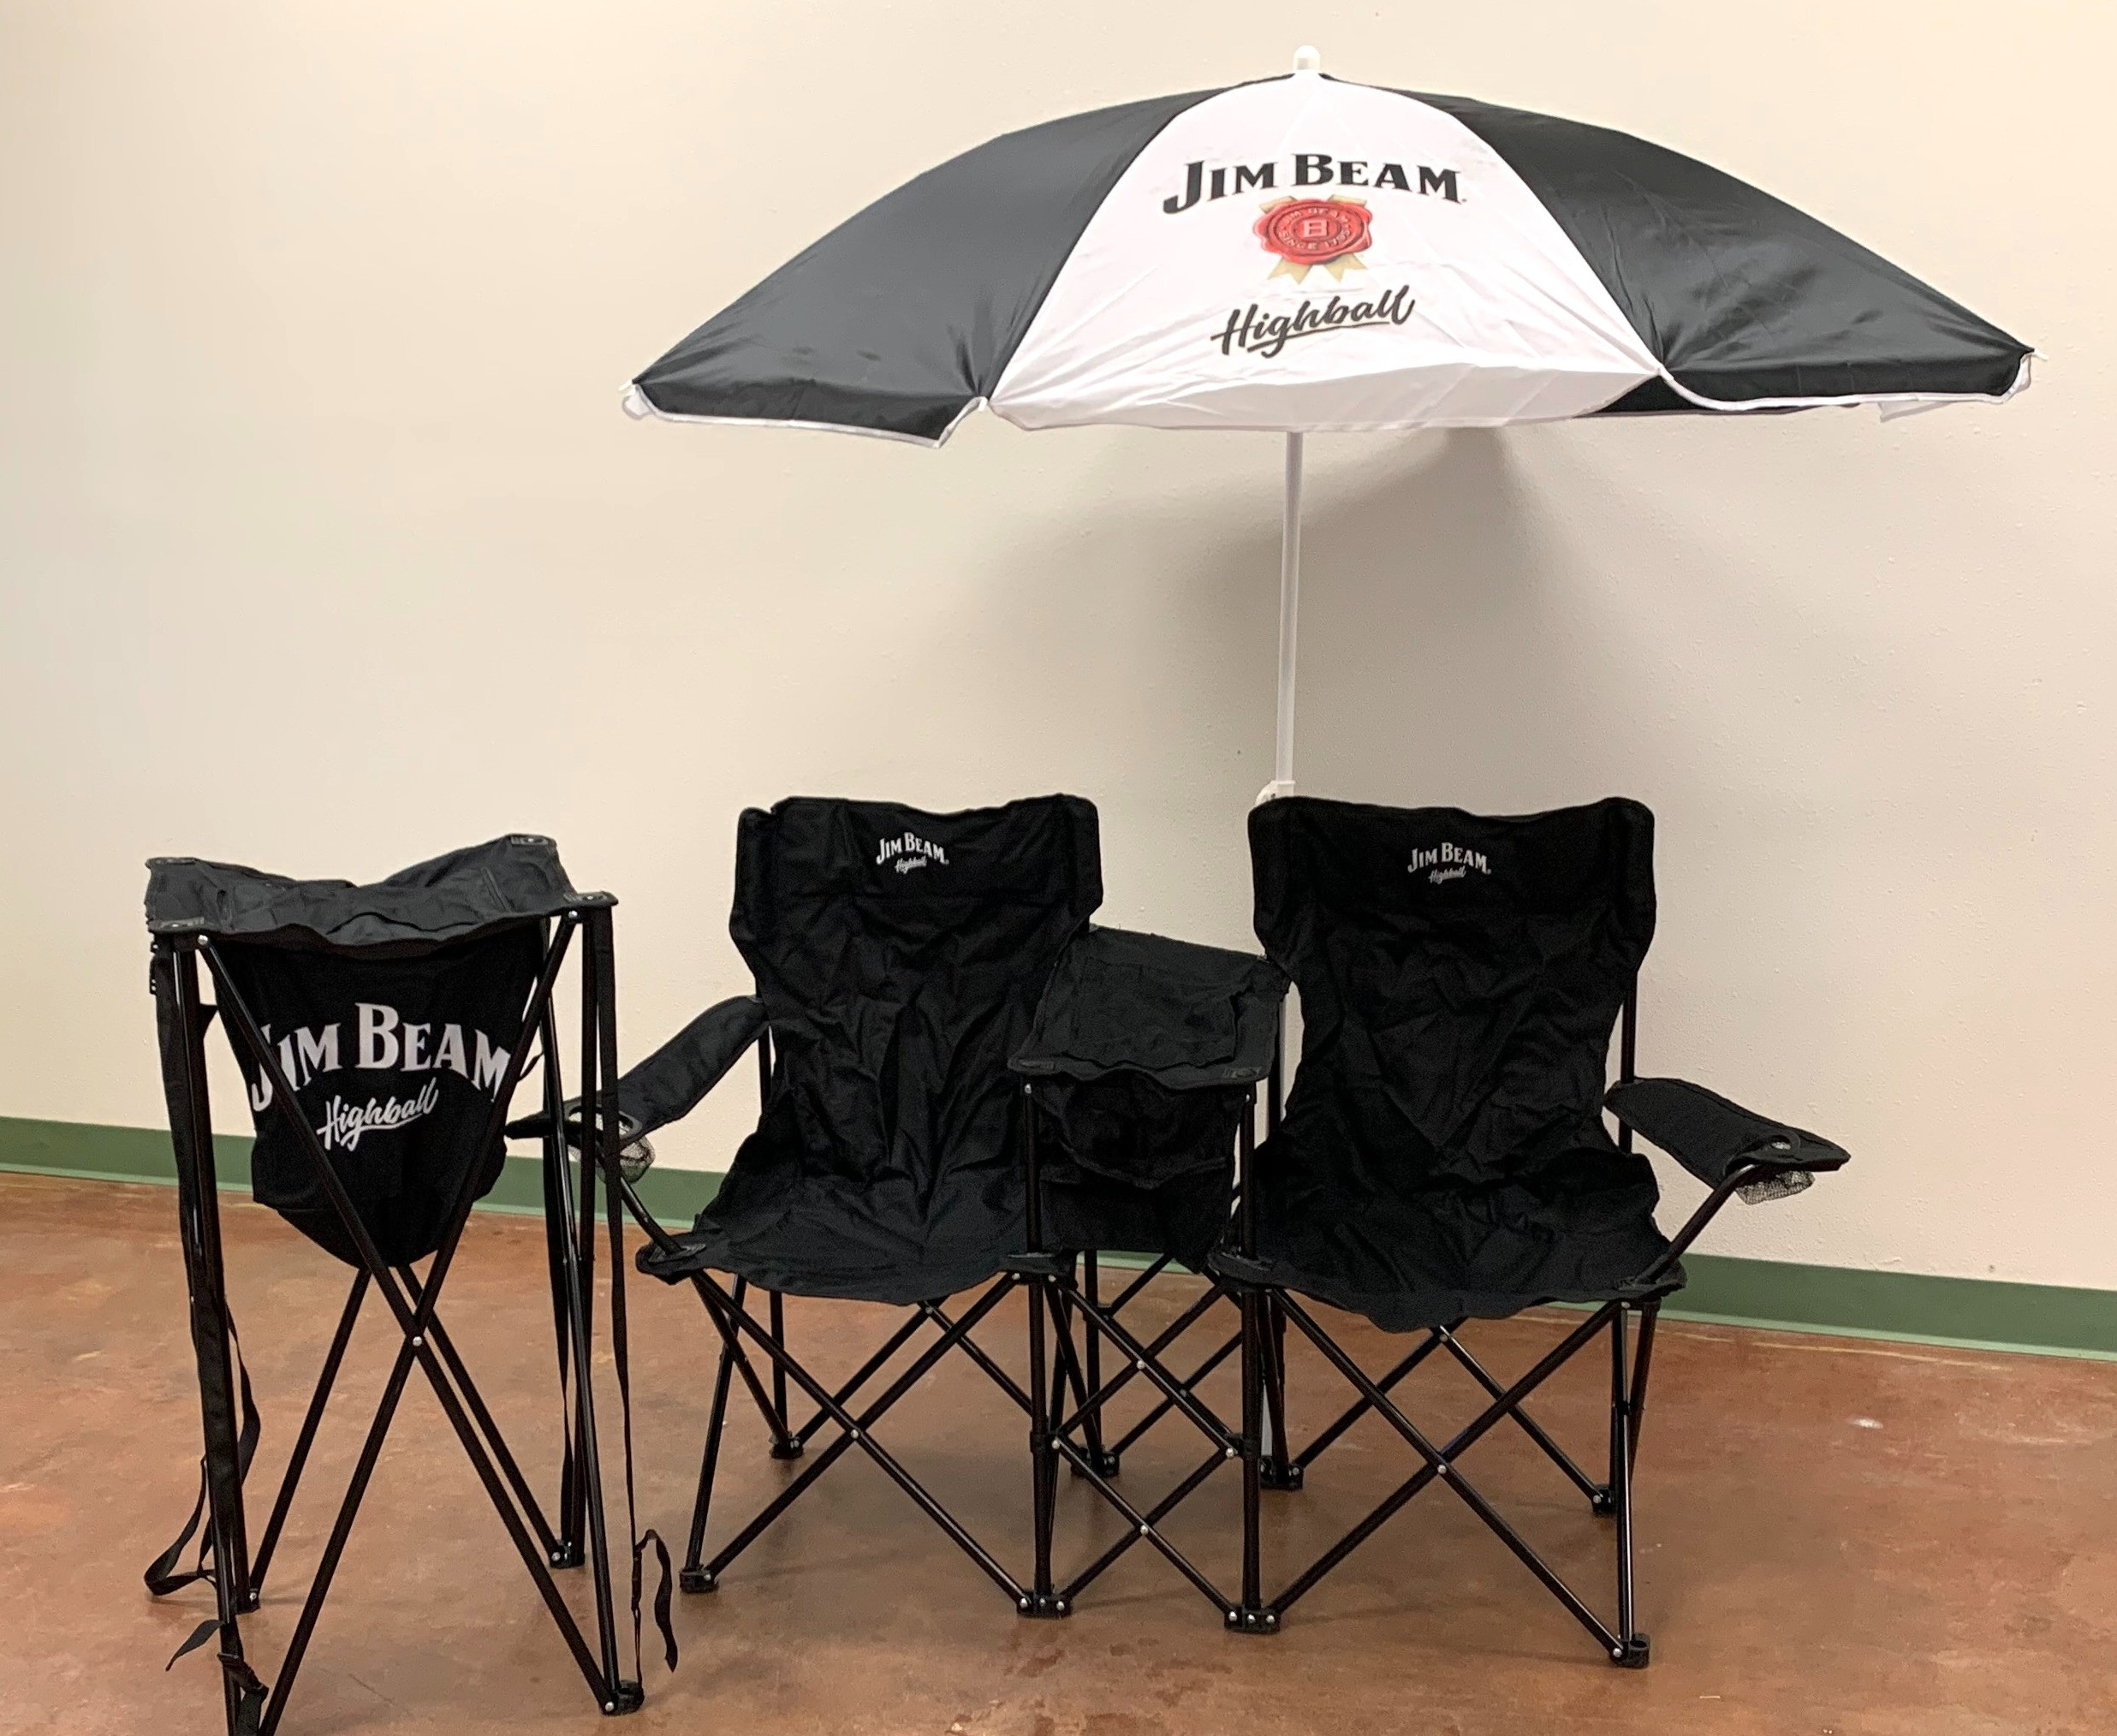 Jim Beam Portable Pop Up Cooler with stand & Jim Beam Double Folding Chairs with Umbrella & Mini Table Beverage Holder